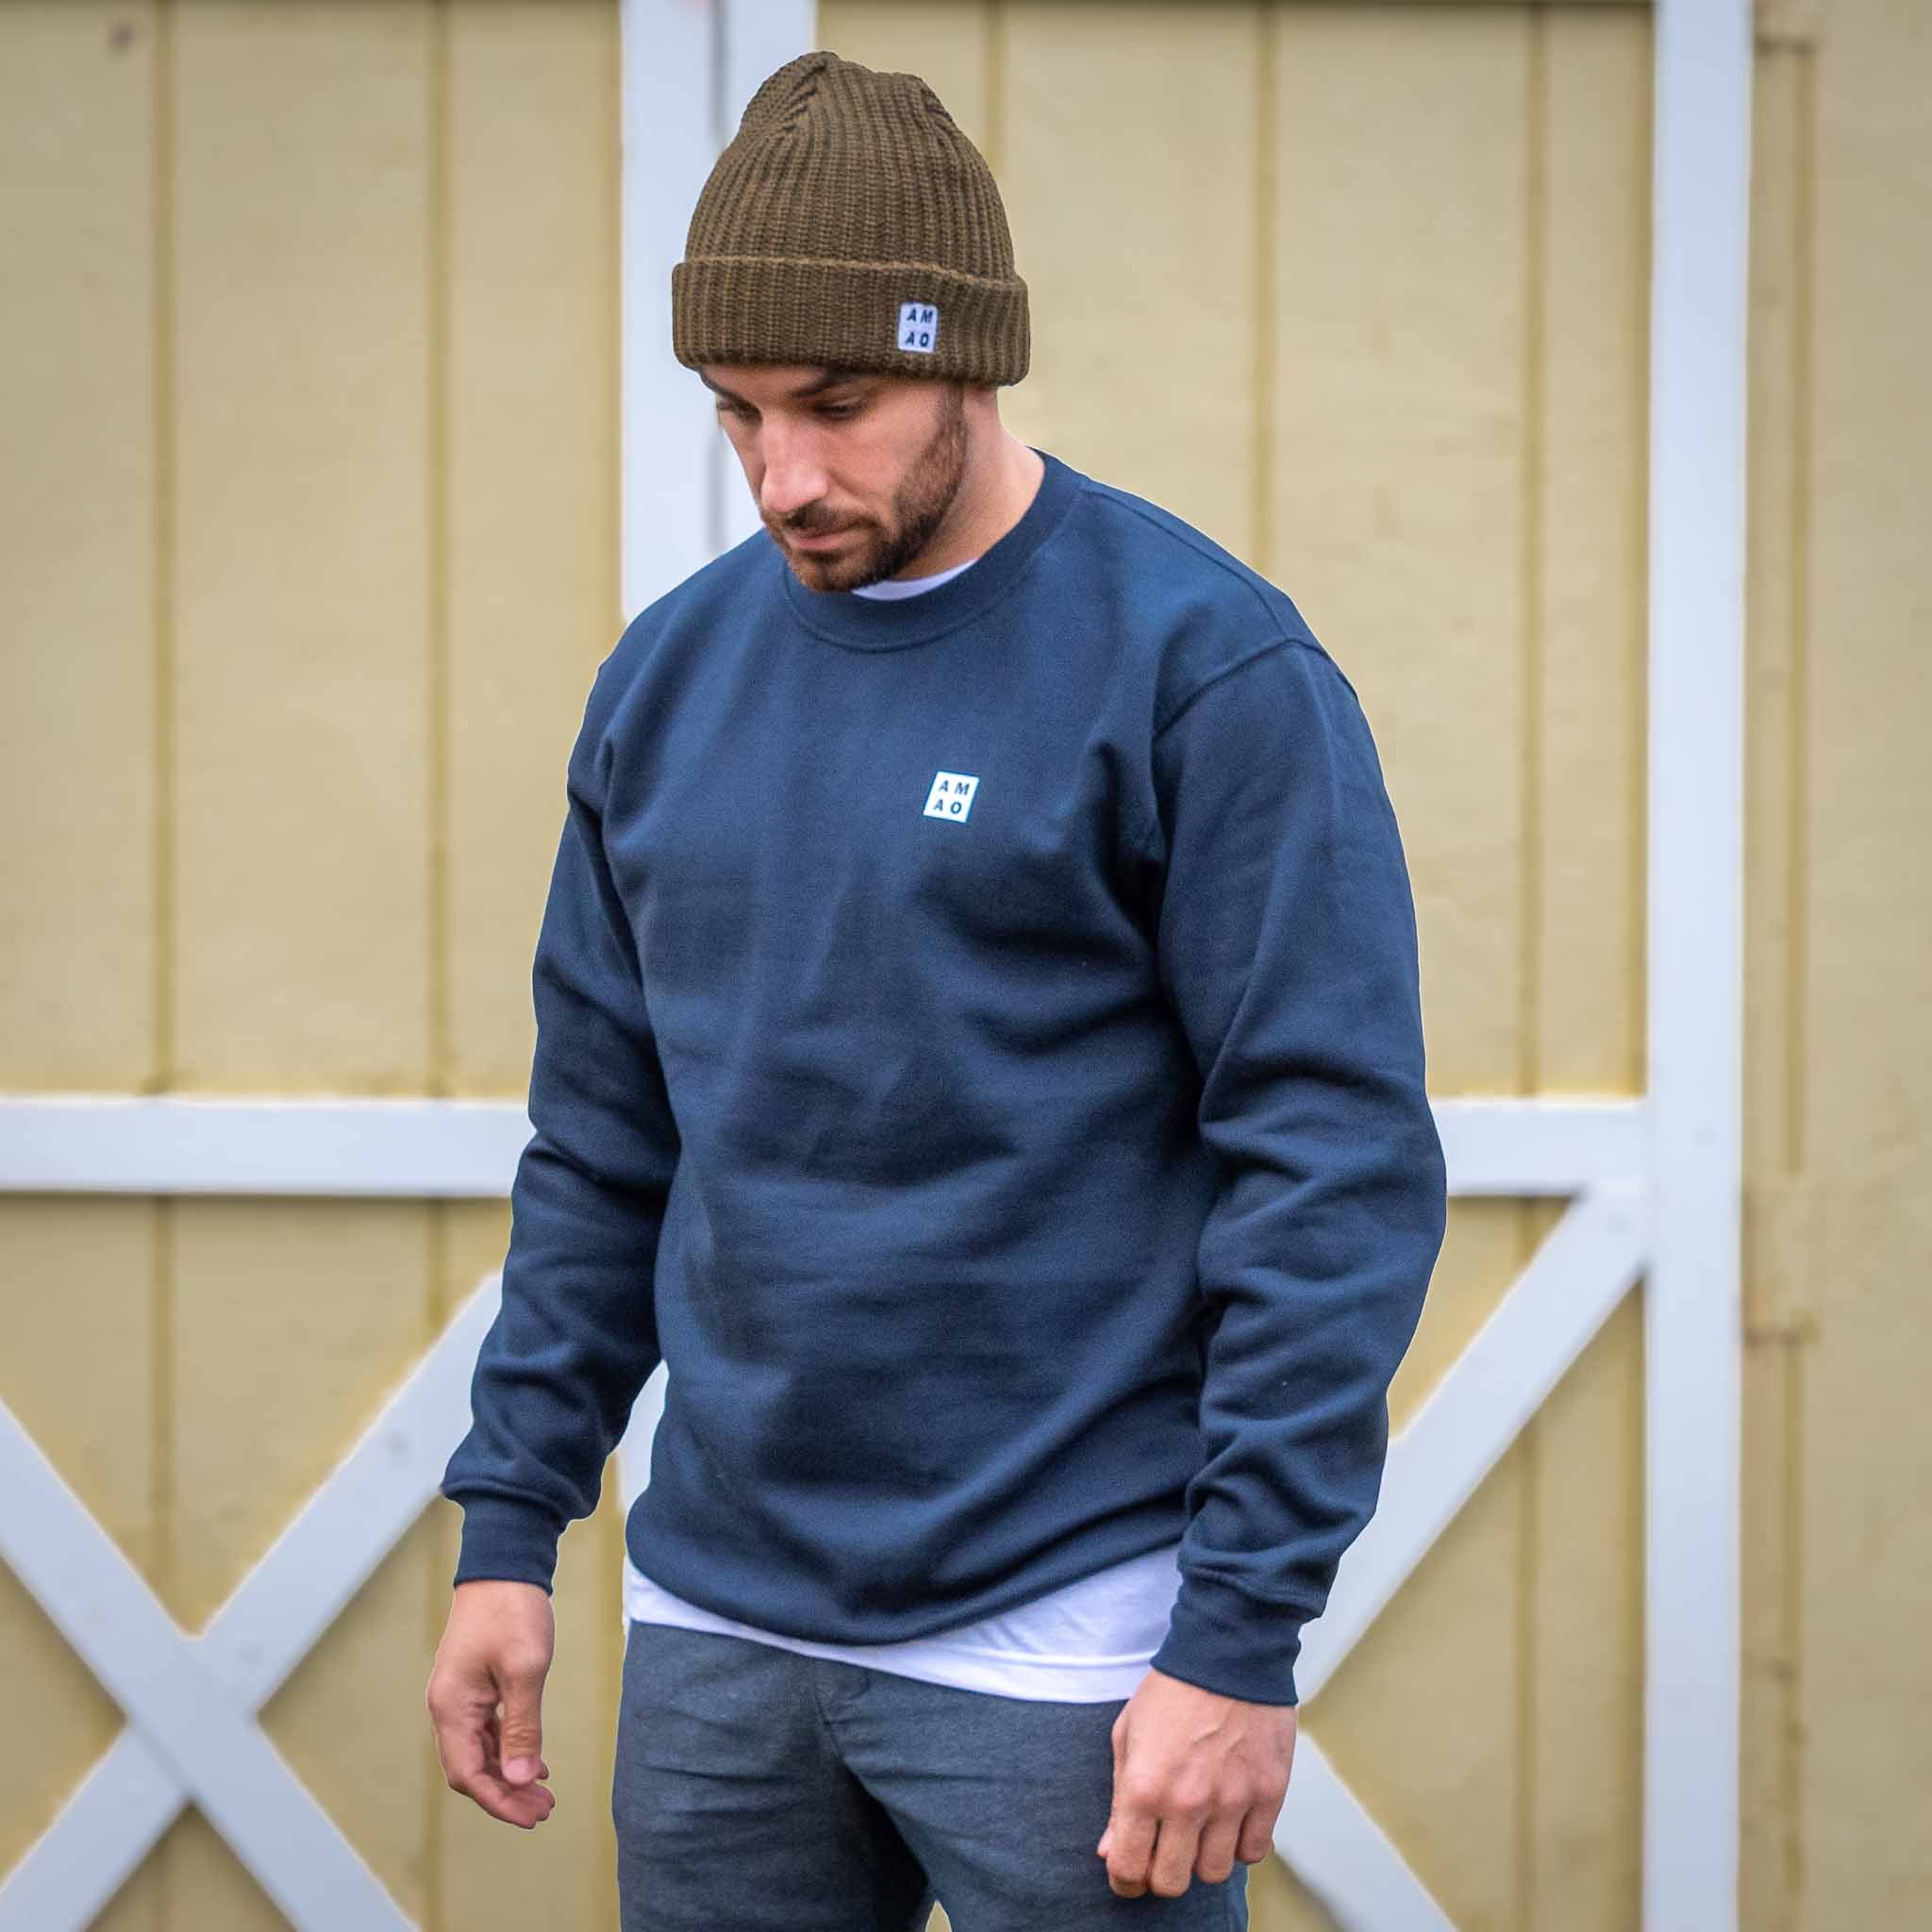 AMAO Crew Fleece Pullover - Compare at $154.99  (Made to Order - Allow 2-3 weeks for delivery)